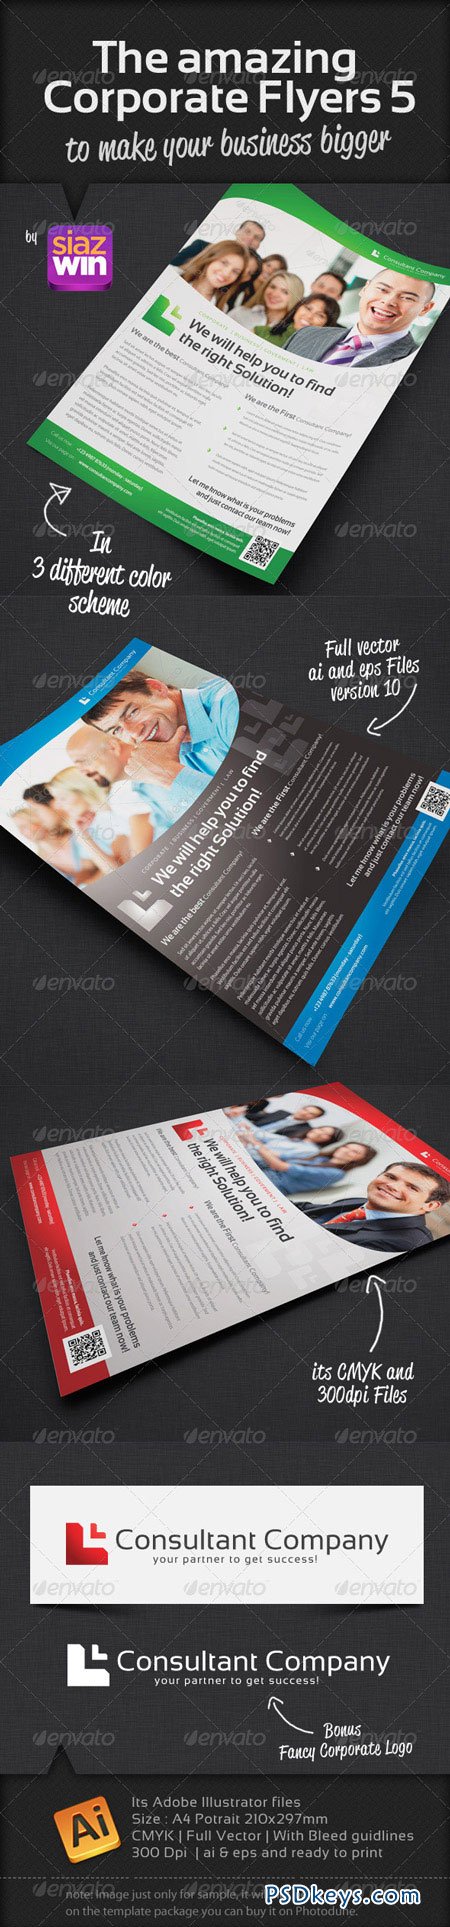 The Amazing Corporate Flyers 5 2734065